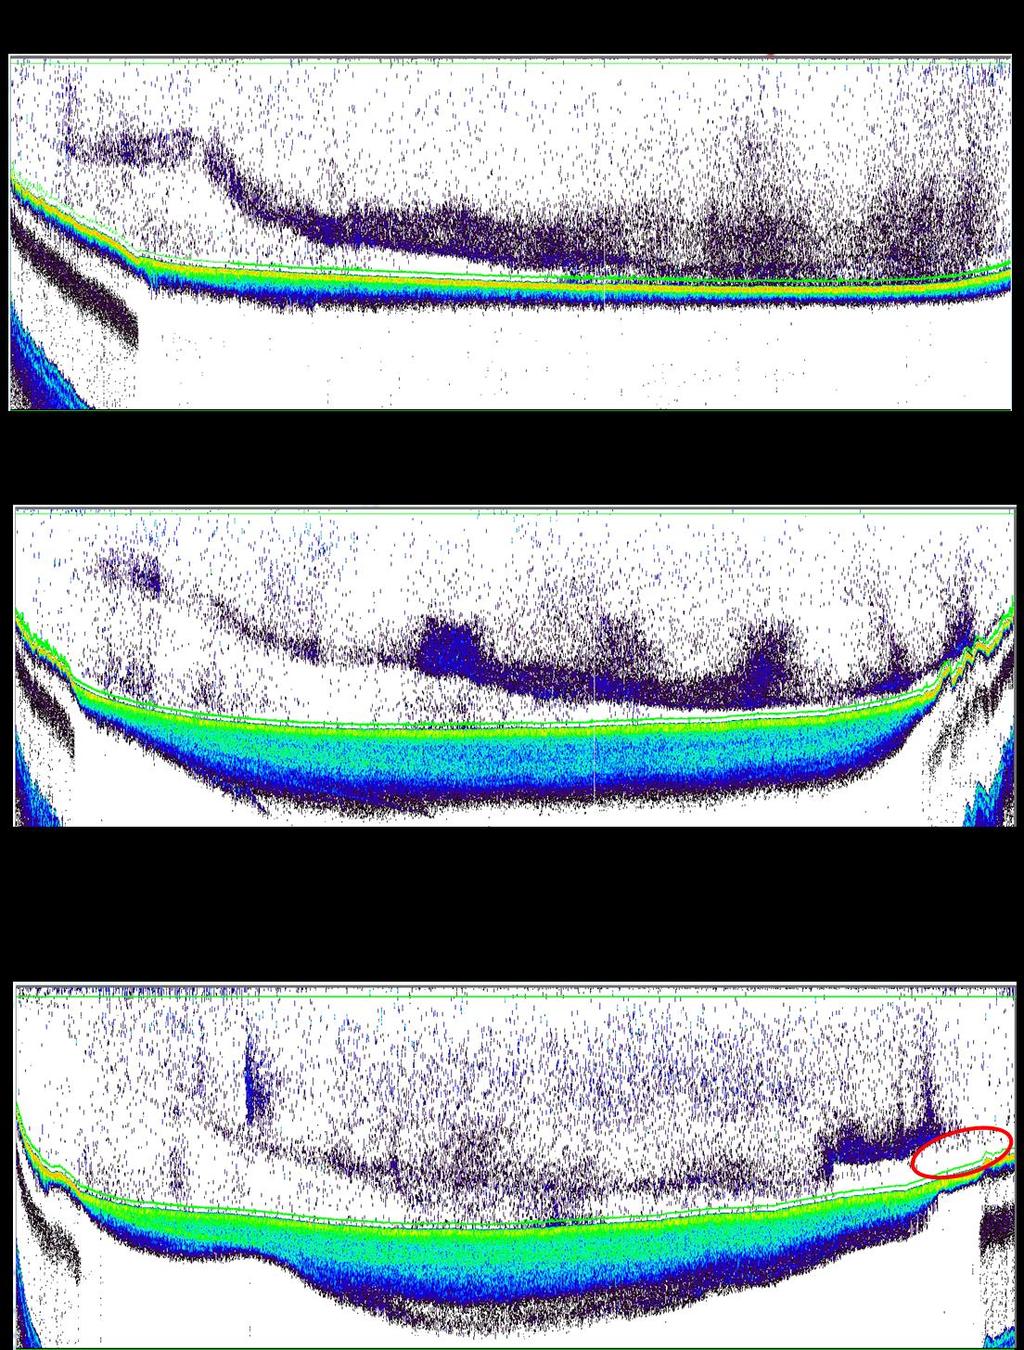 Figure 3.2.6. Echogram files generated from Echoview software version 6.